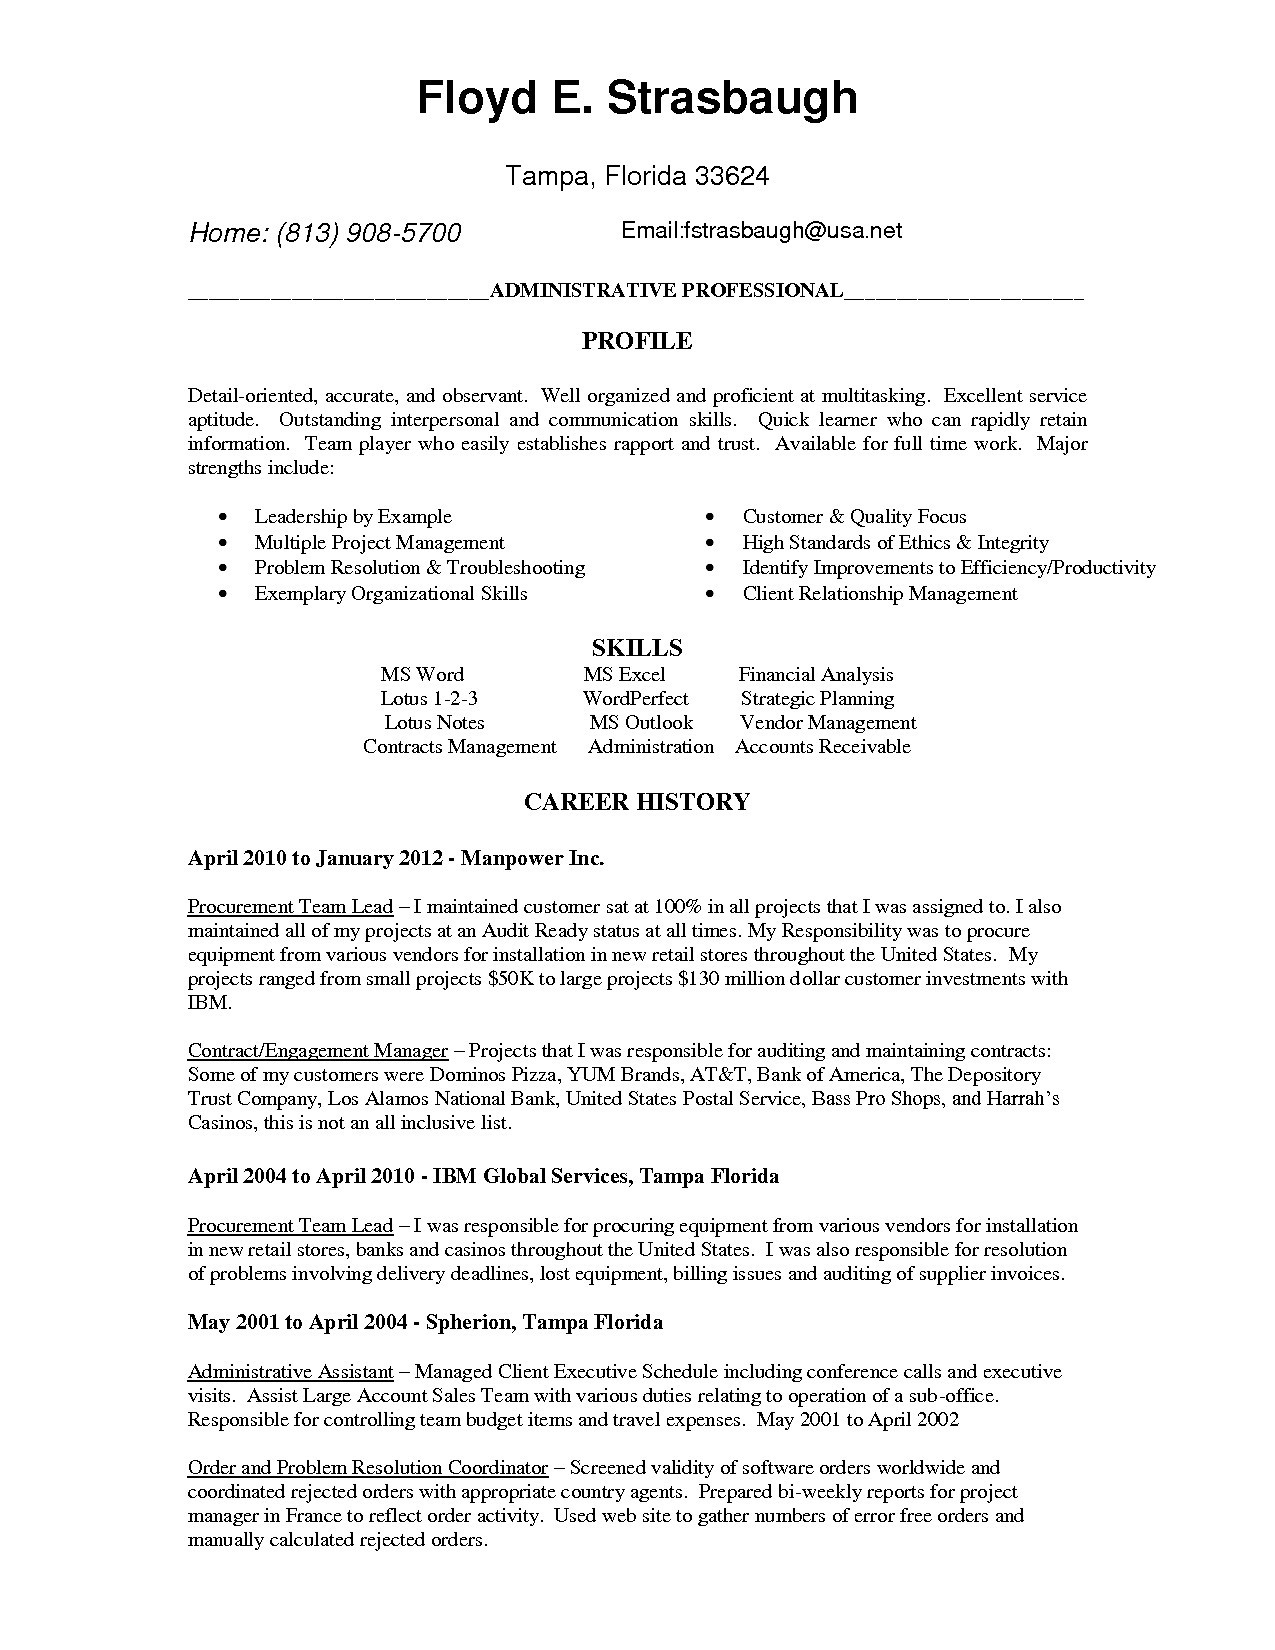 Sales Proposal Letter Template - Sample Email Cover Letter for Business Proposal